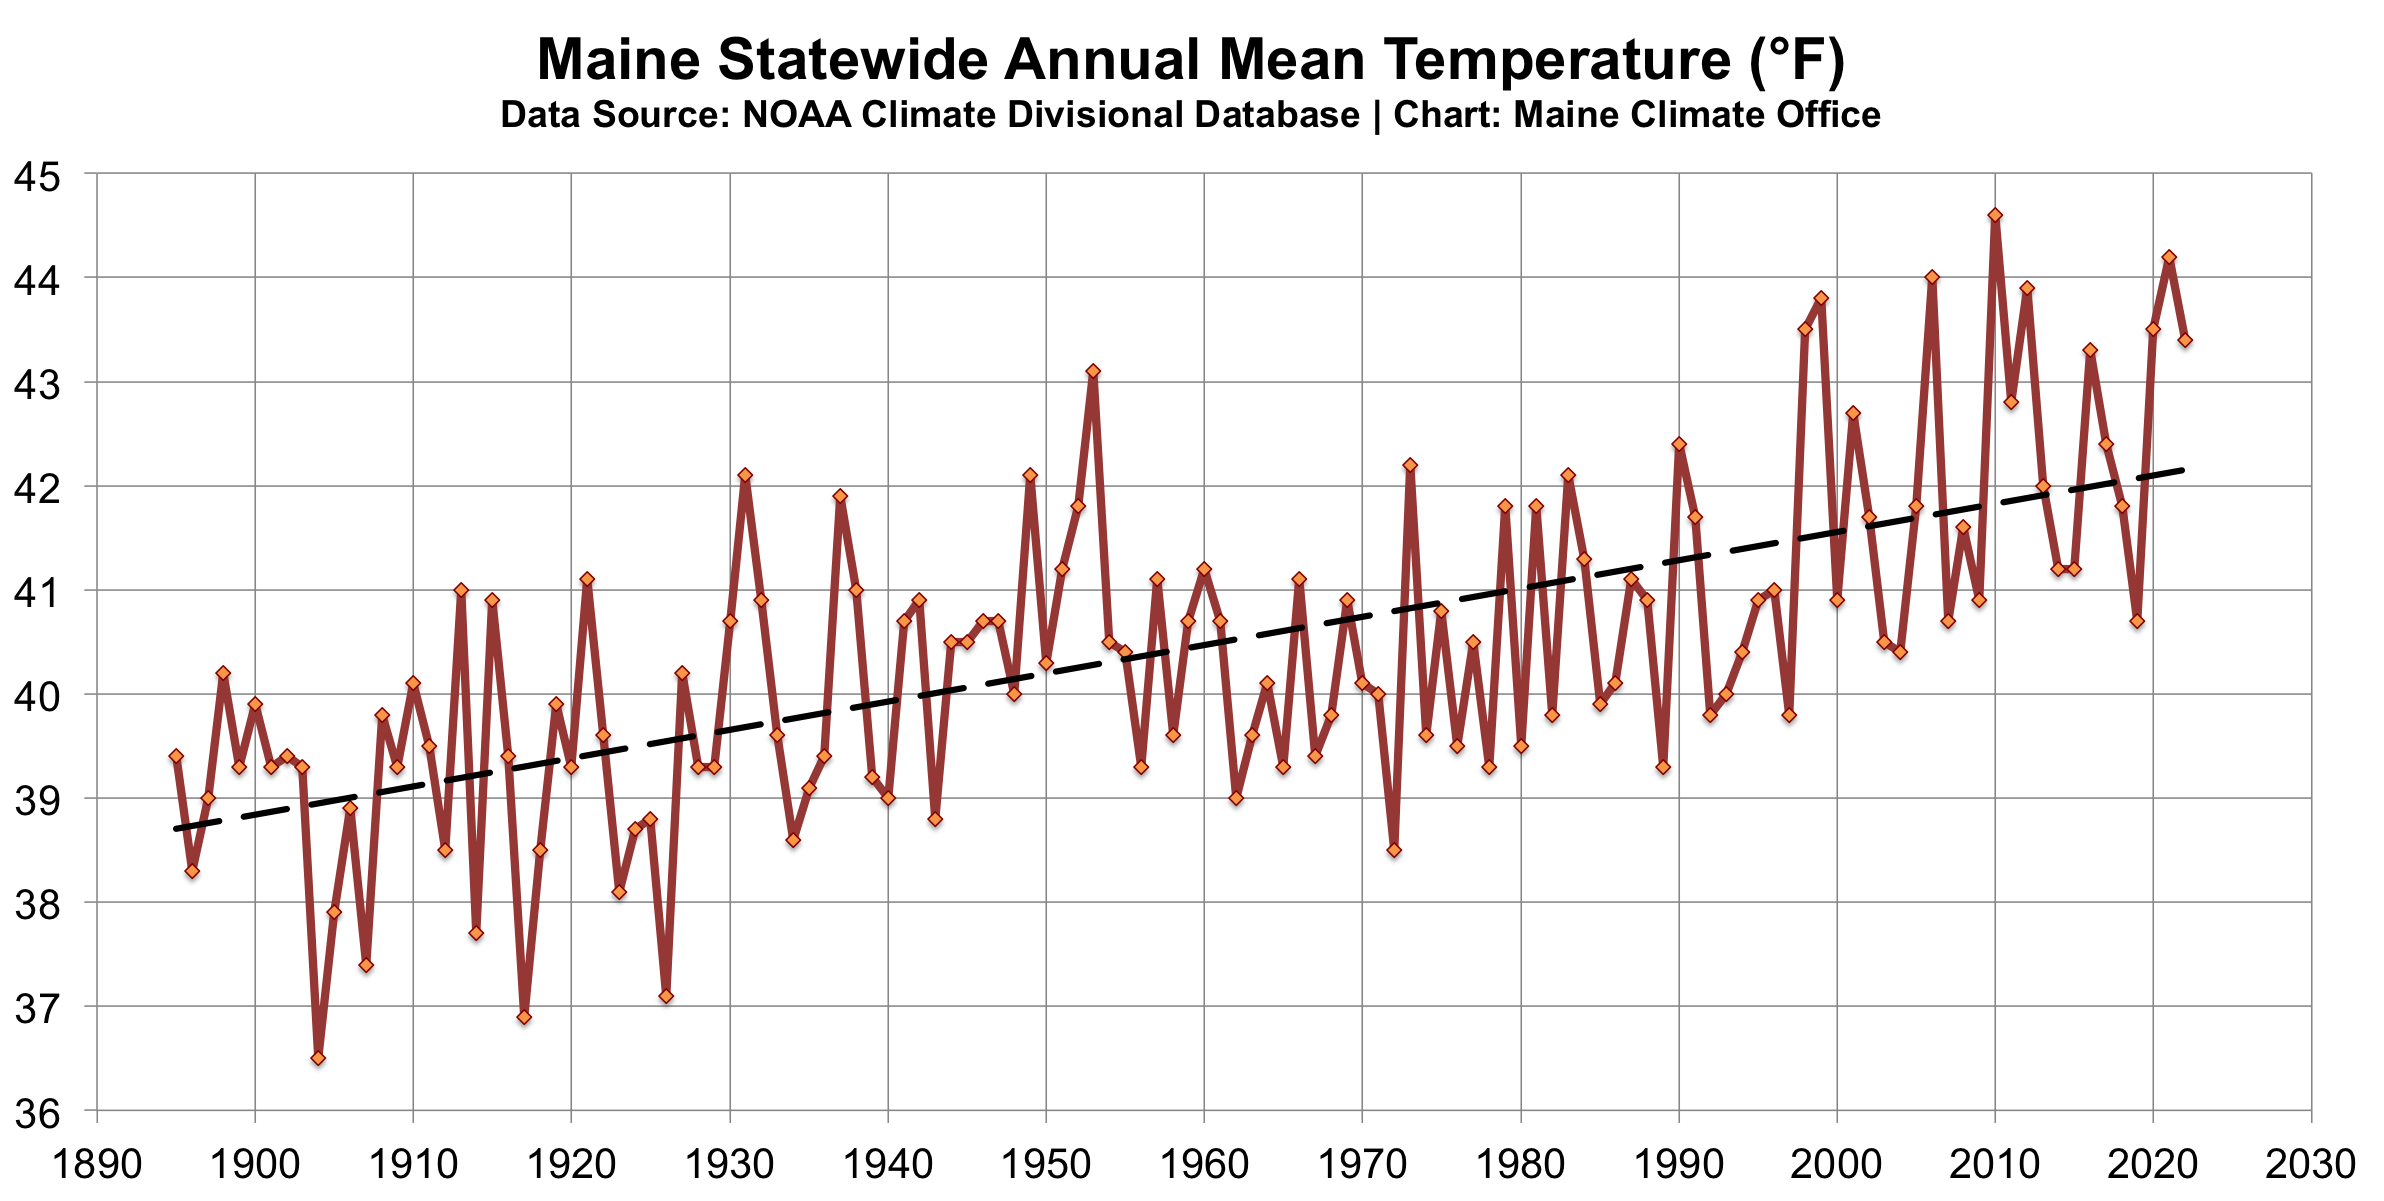 Maine Statewide Annual Mean Temperature